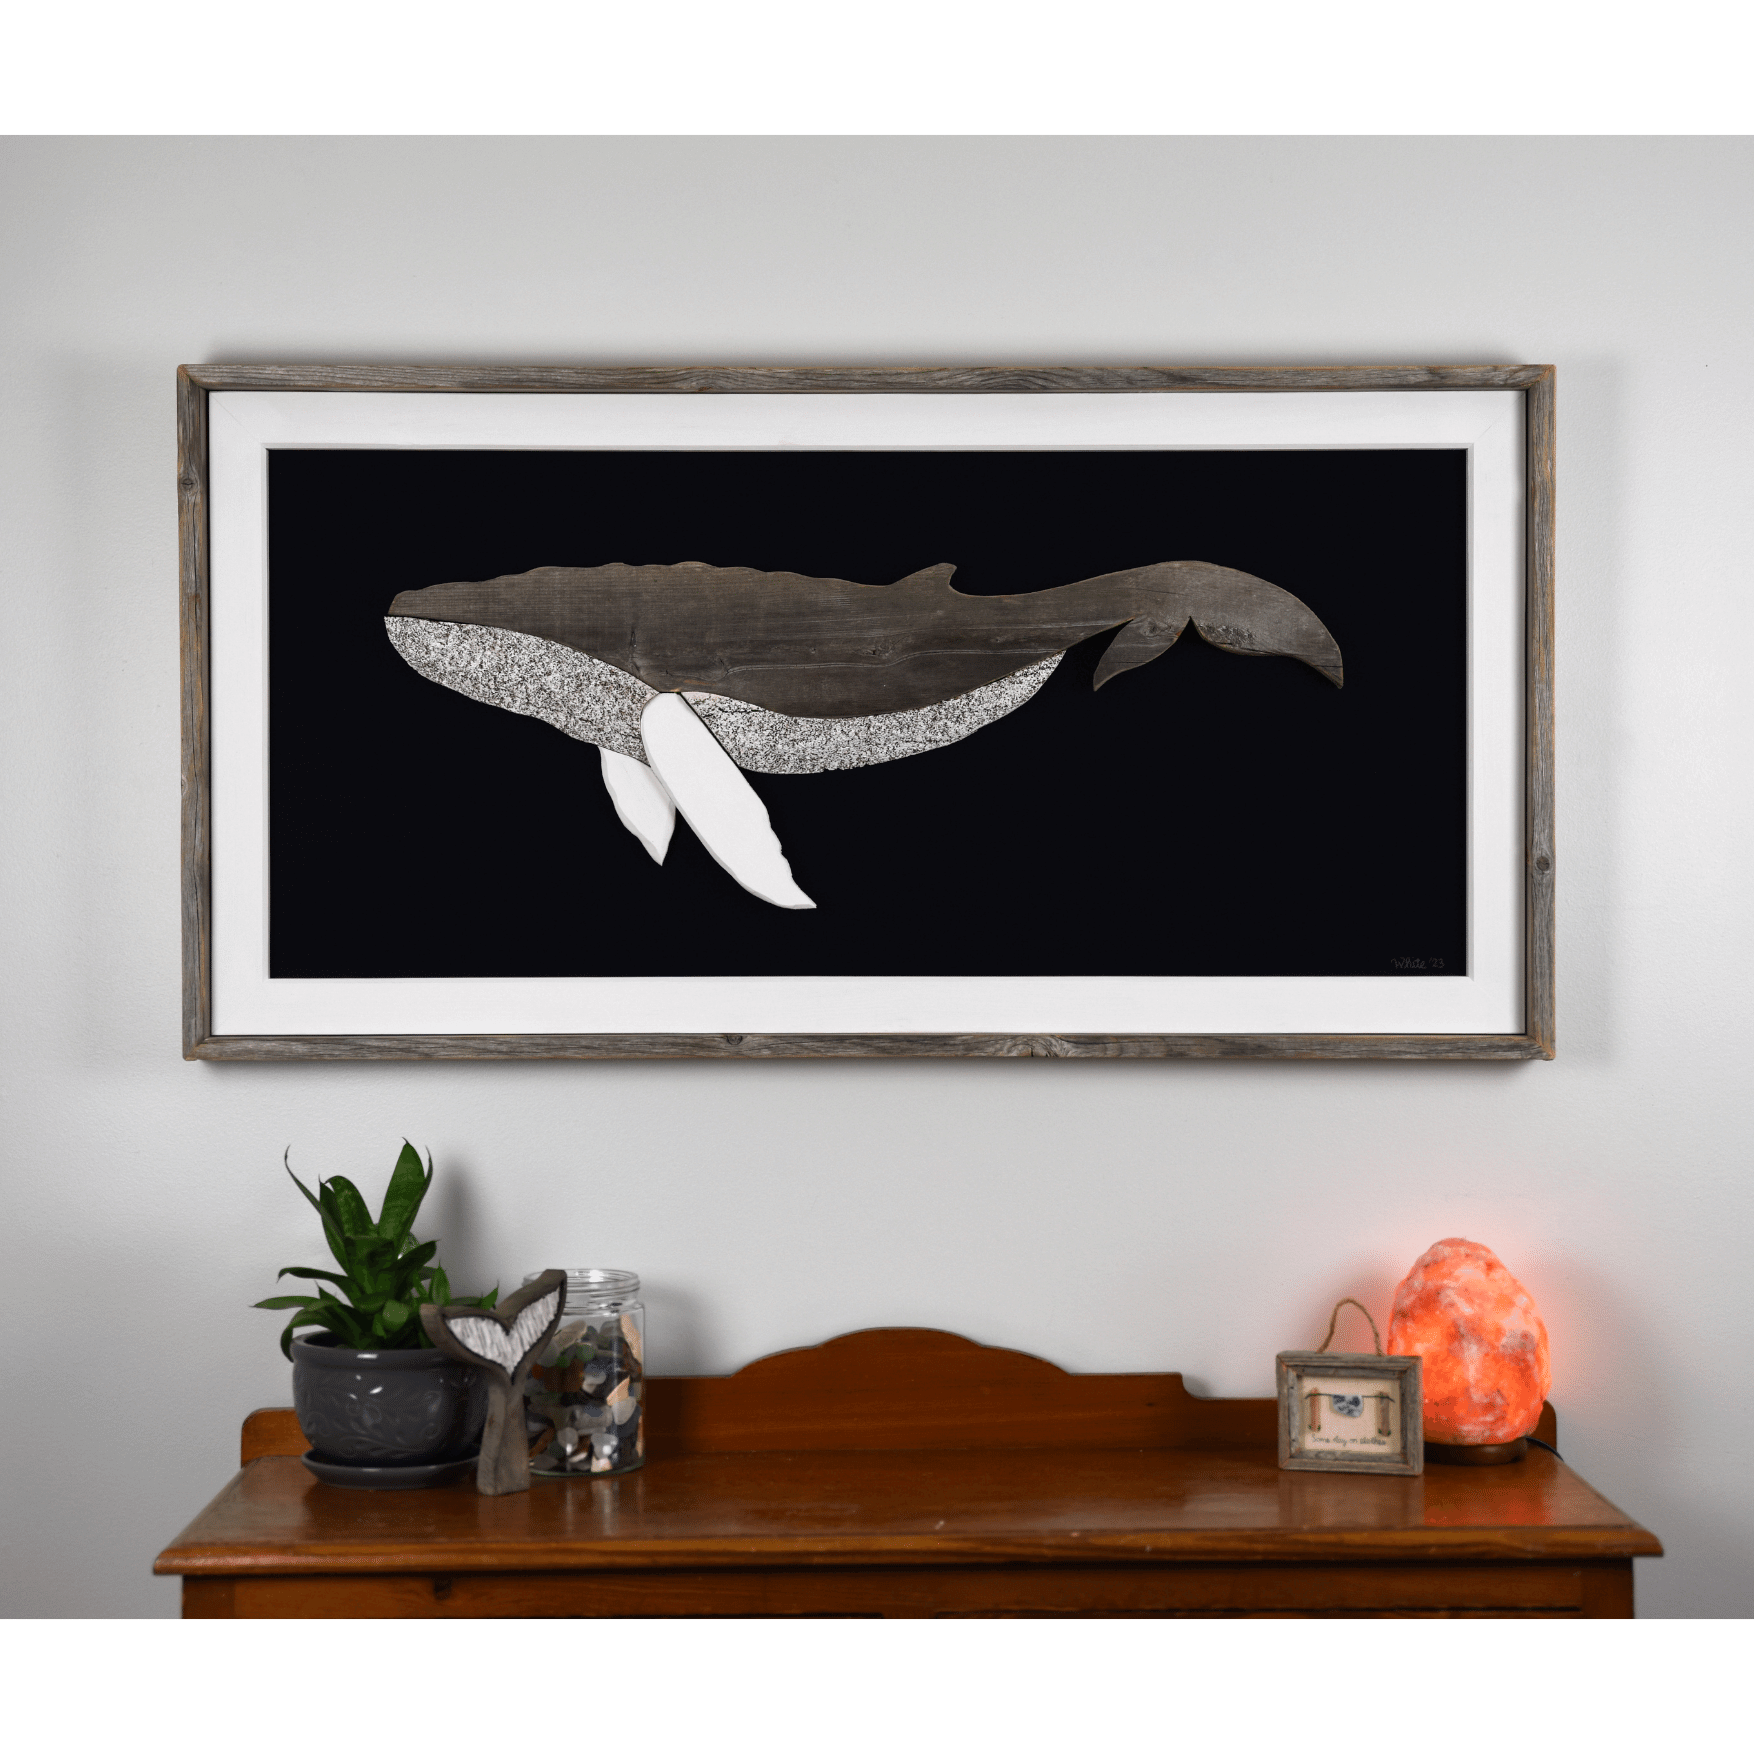 The Grandback features a whale made from reclaimed wood and driftwood with driftwood/reclaimed wood frame, white pine inside trim, and a navy or black canvas backing.